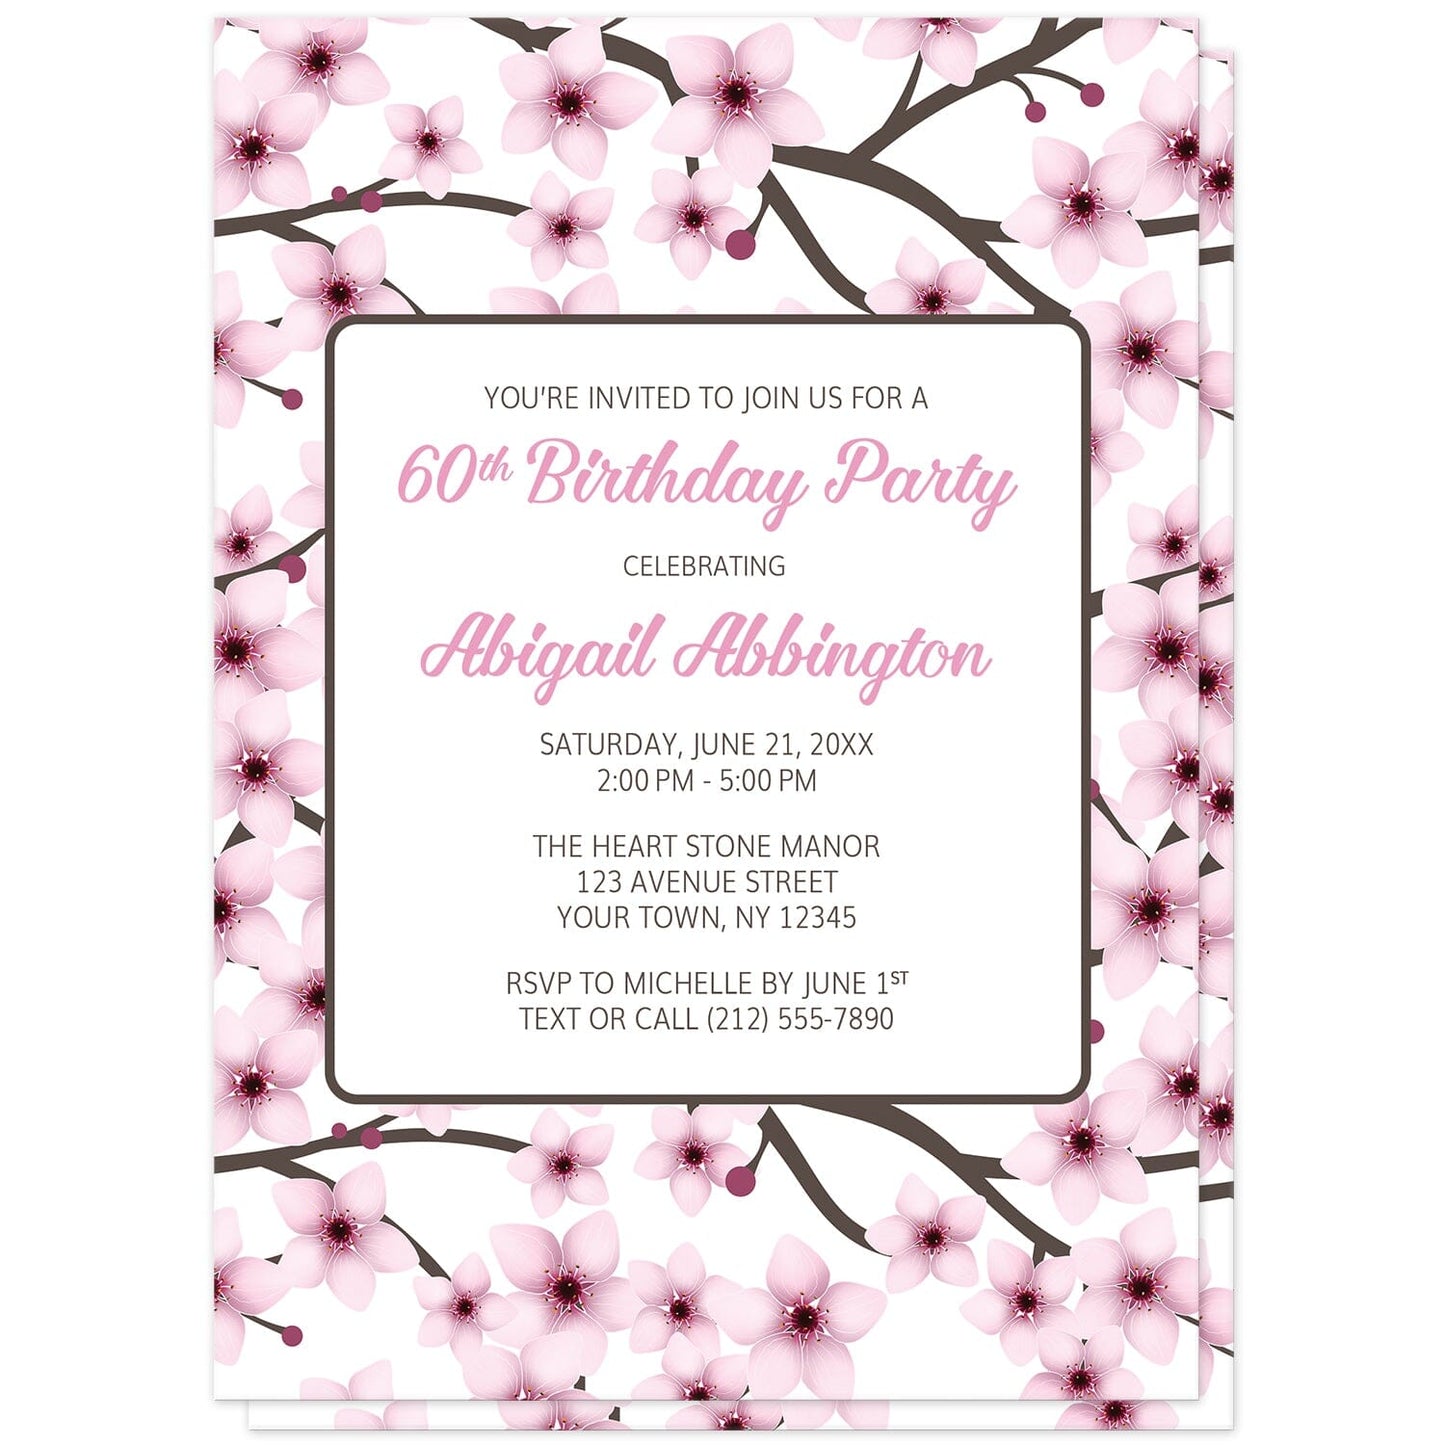 Cherry Blossom Birthday Party Invitations (front) at Artistically Invited. Cherry blossom birthday party invitations designed with a gorgeous pattern of pink cherry blossom branches. This beautiful floral background design is also printed on the back side of the invitations. Personalize these invitations with your birthday celebration details in pink and dark brown in a white rectangular area over the pretty cherry blossoms. 